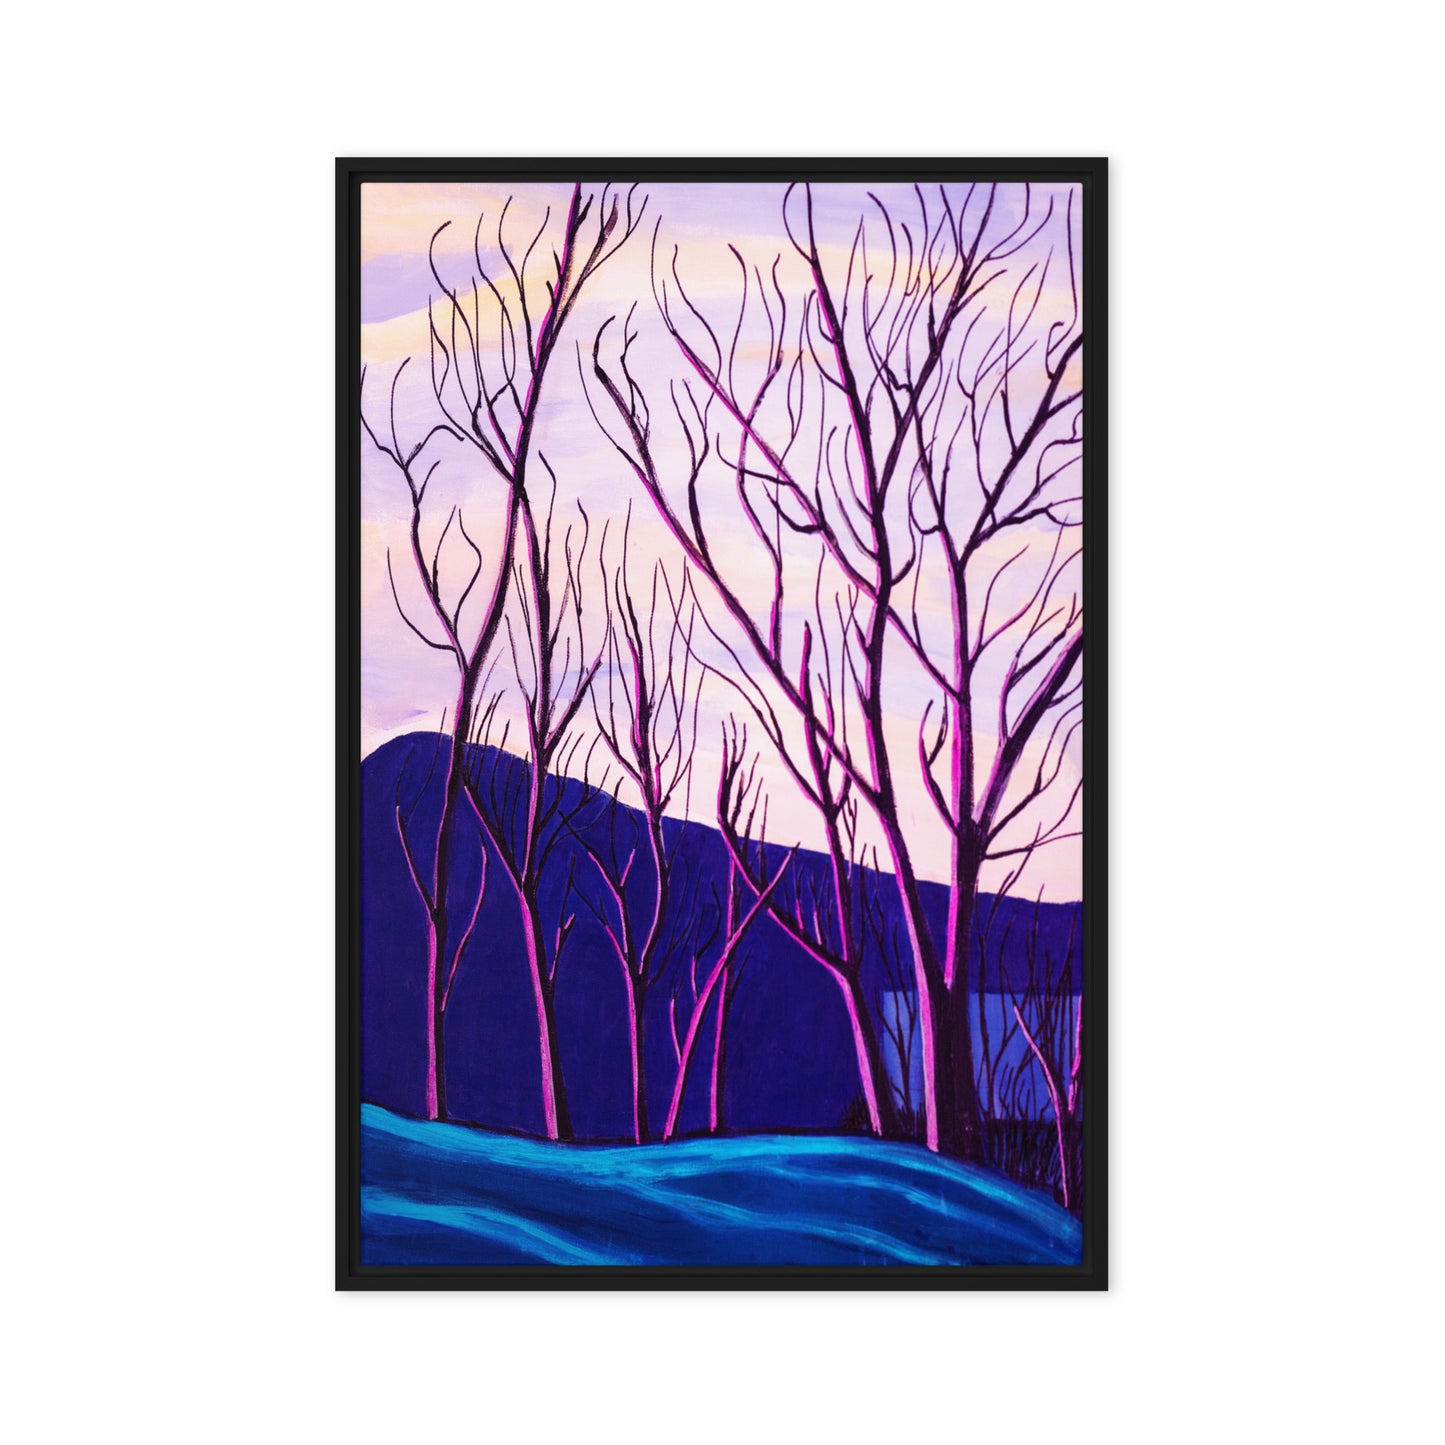 Cool Winter Day in Urbana, Maryland- Framed canvas